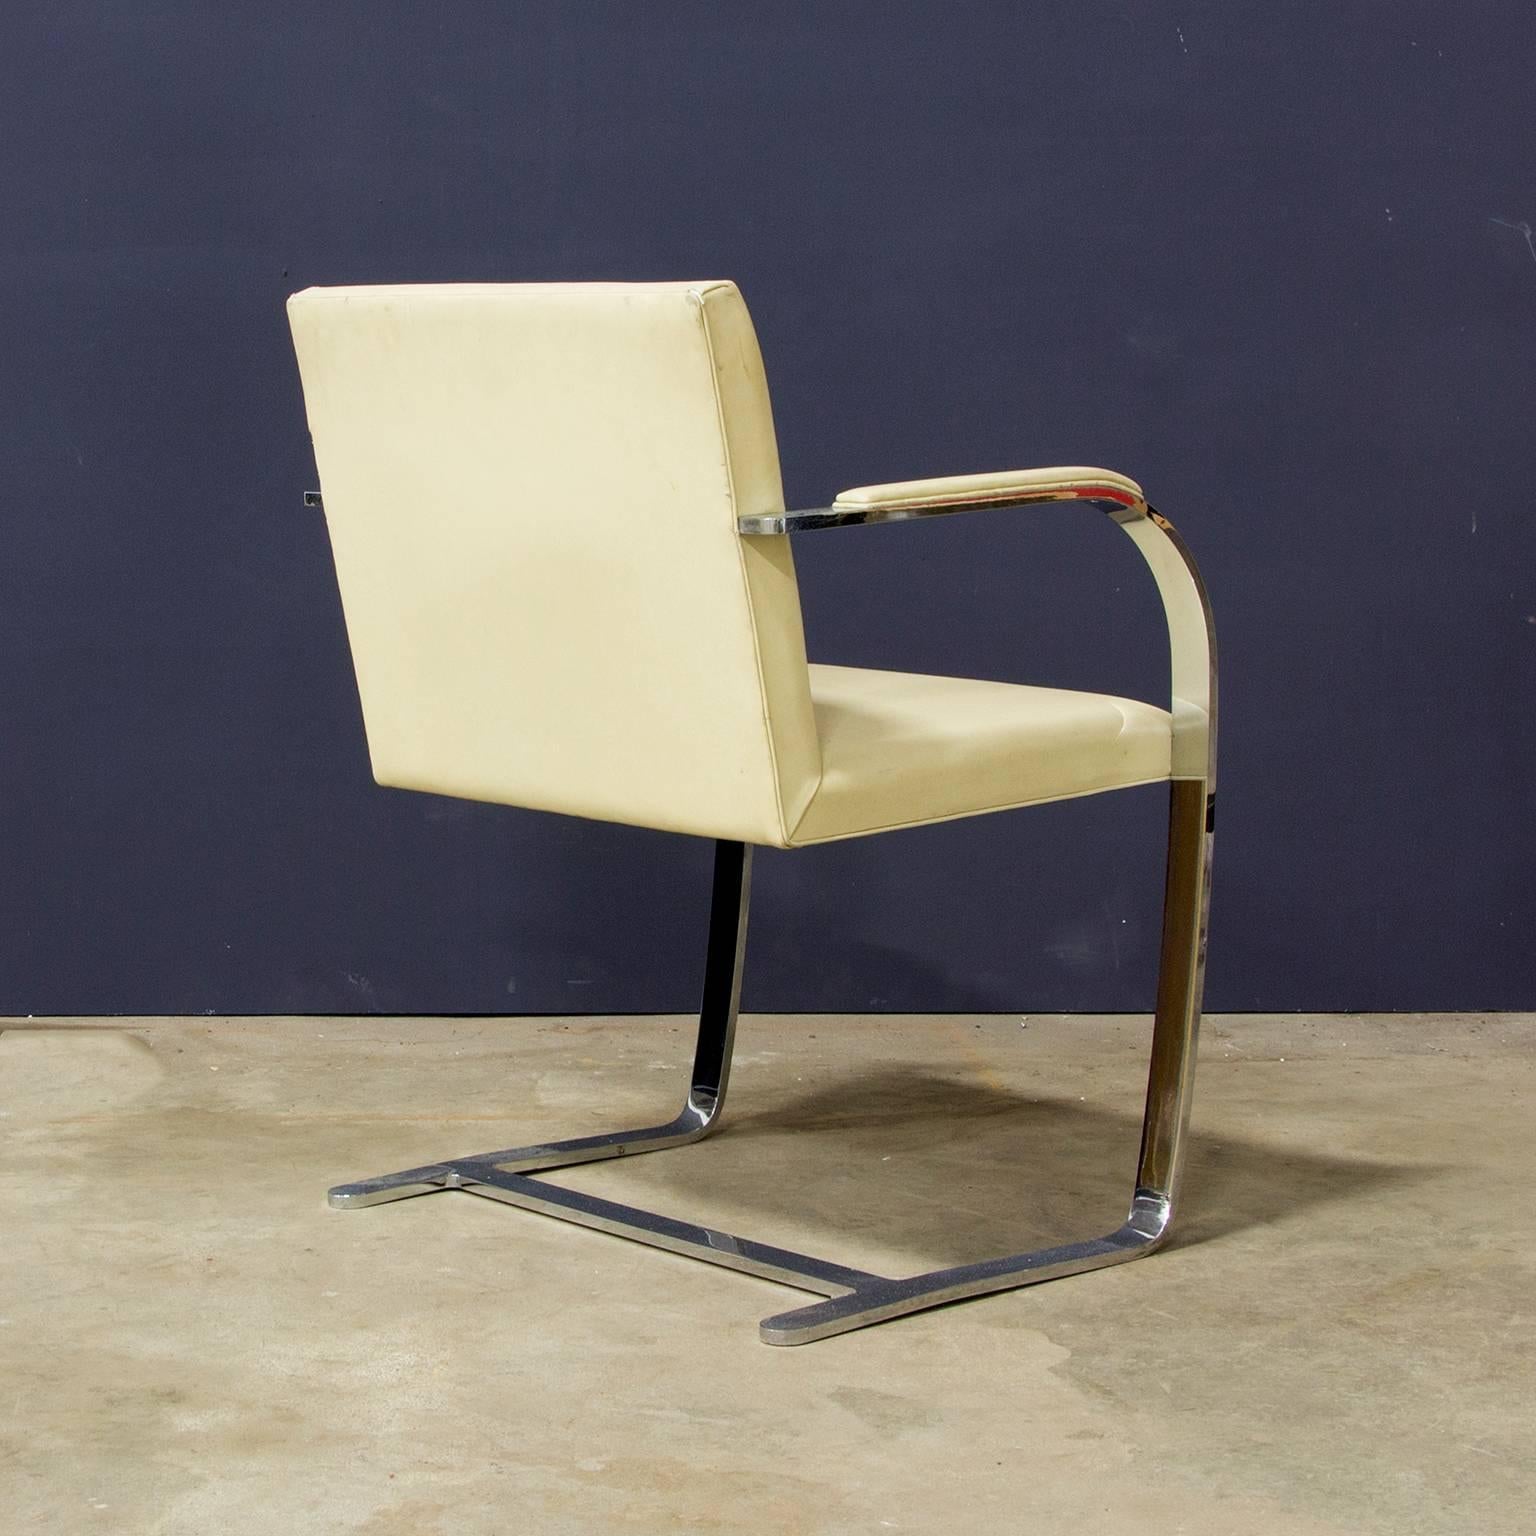 German 1928, Ludwig Mies van der Rohe, Early Knoll Set Brno Chairs in Crème Leather